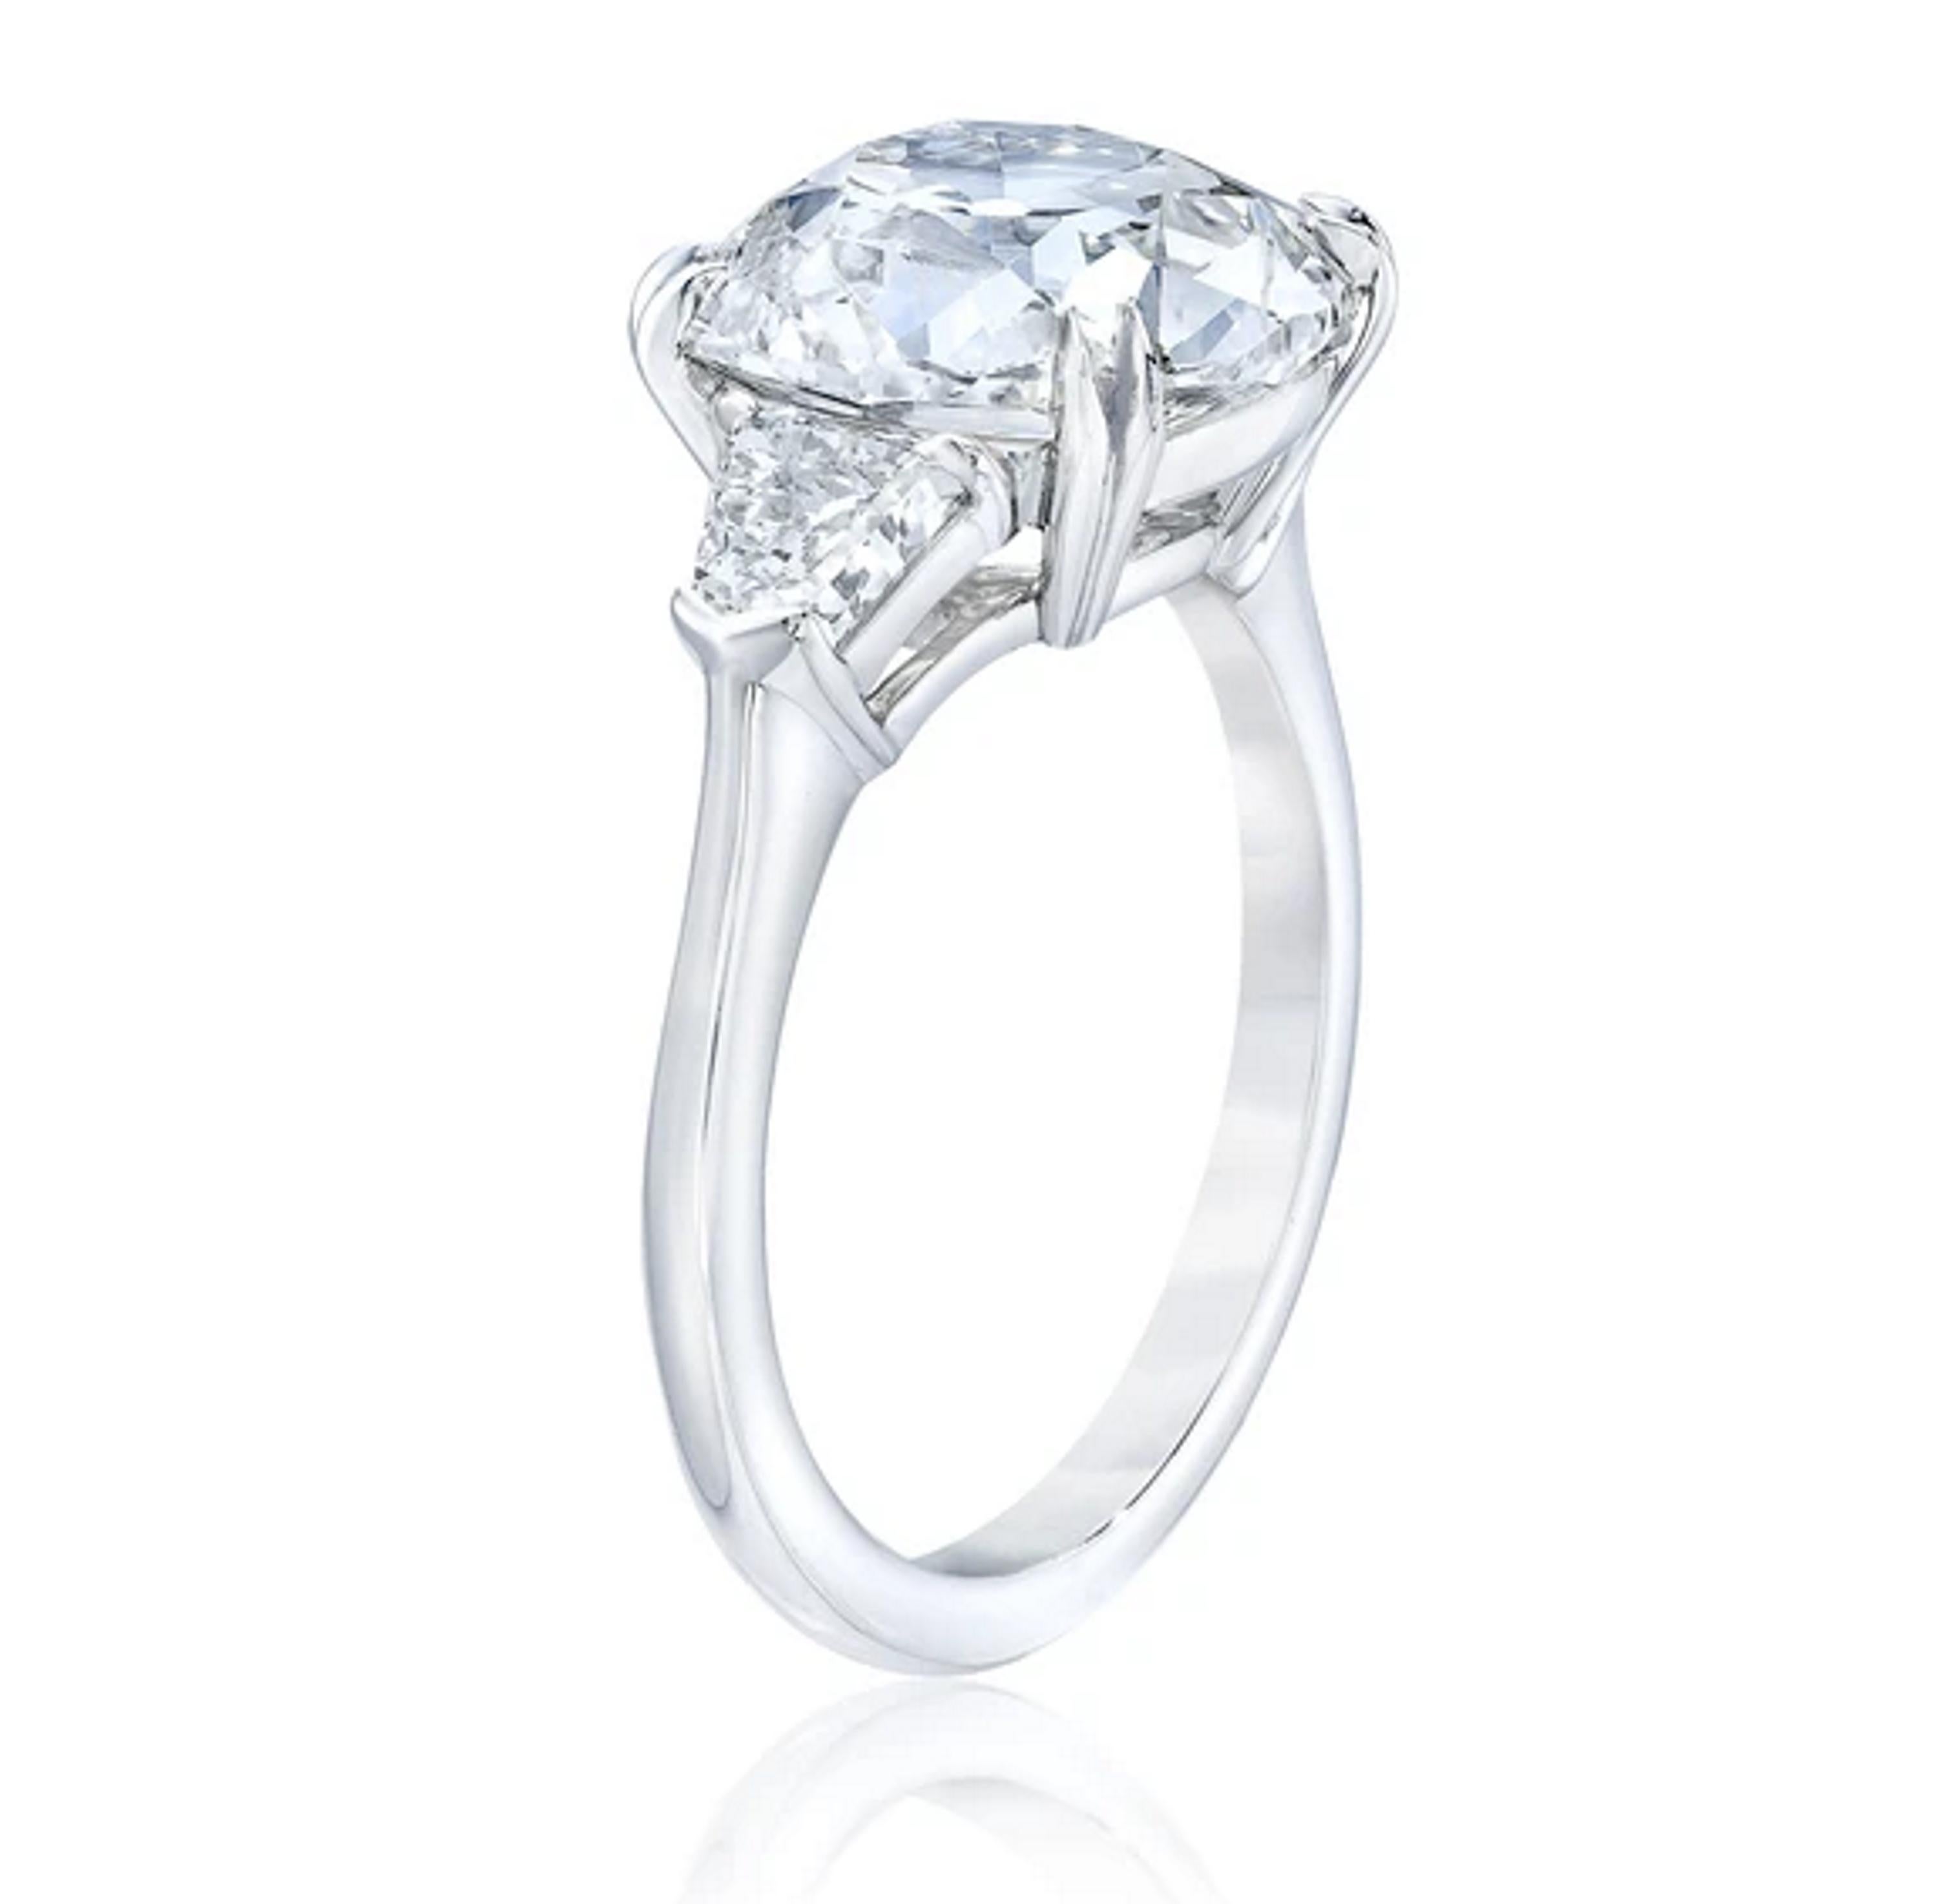 This three stone diamond ring features an 1.17 Old Mine Cut center 
GIA Certificate Included
Gemstone:  Diamond
Diamond Weight: 1.17 Carats - Old Mine Brilliant Cut - 
Center Diamond Color: E
Diamond Clarity: SI 2

